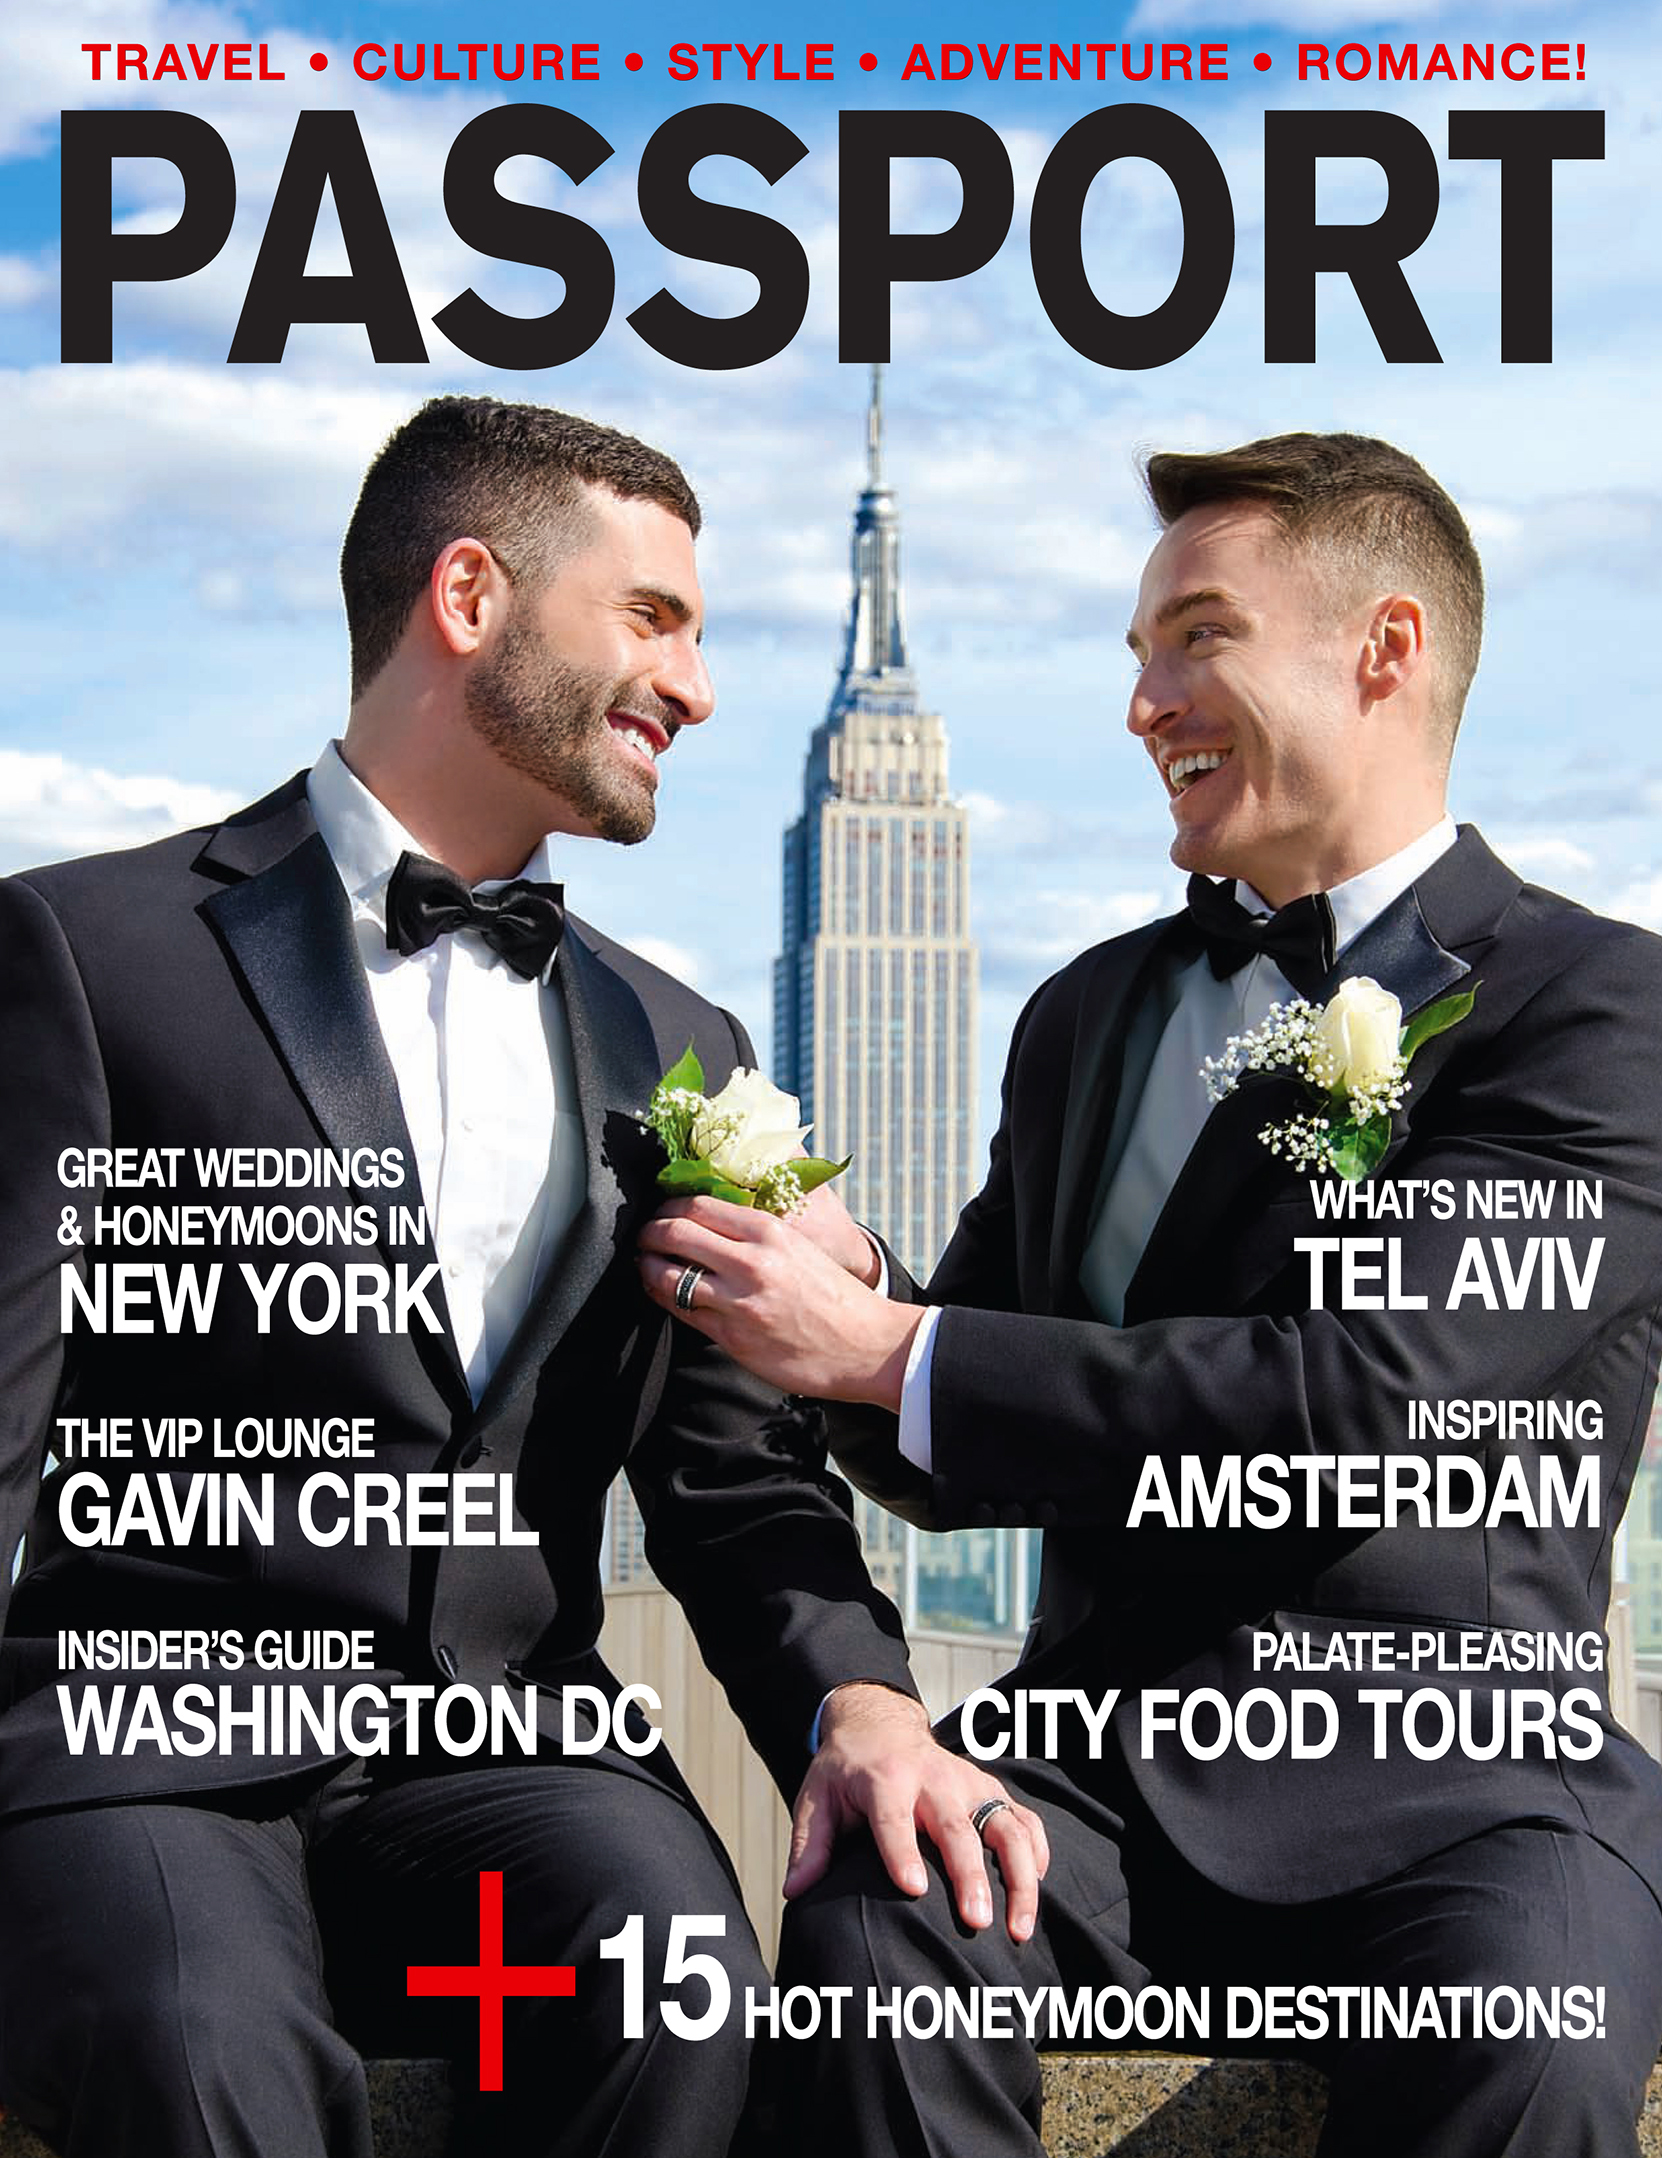 Passport Cover May 2012 - photo by Andrew Werner.jpg